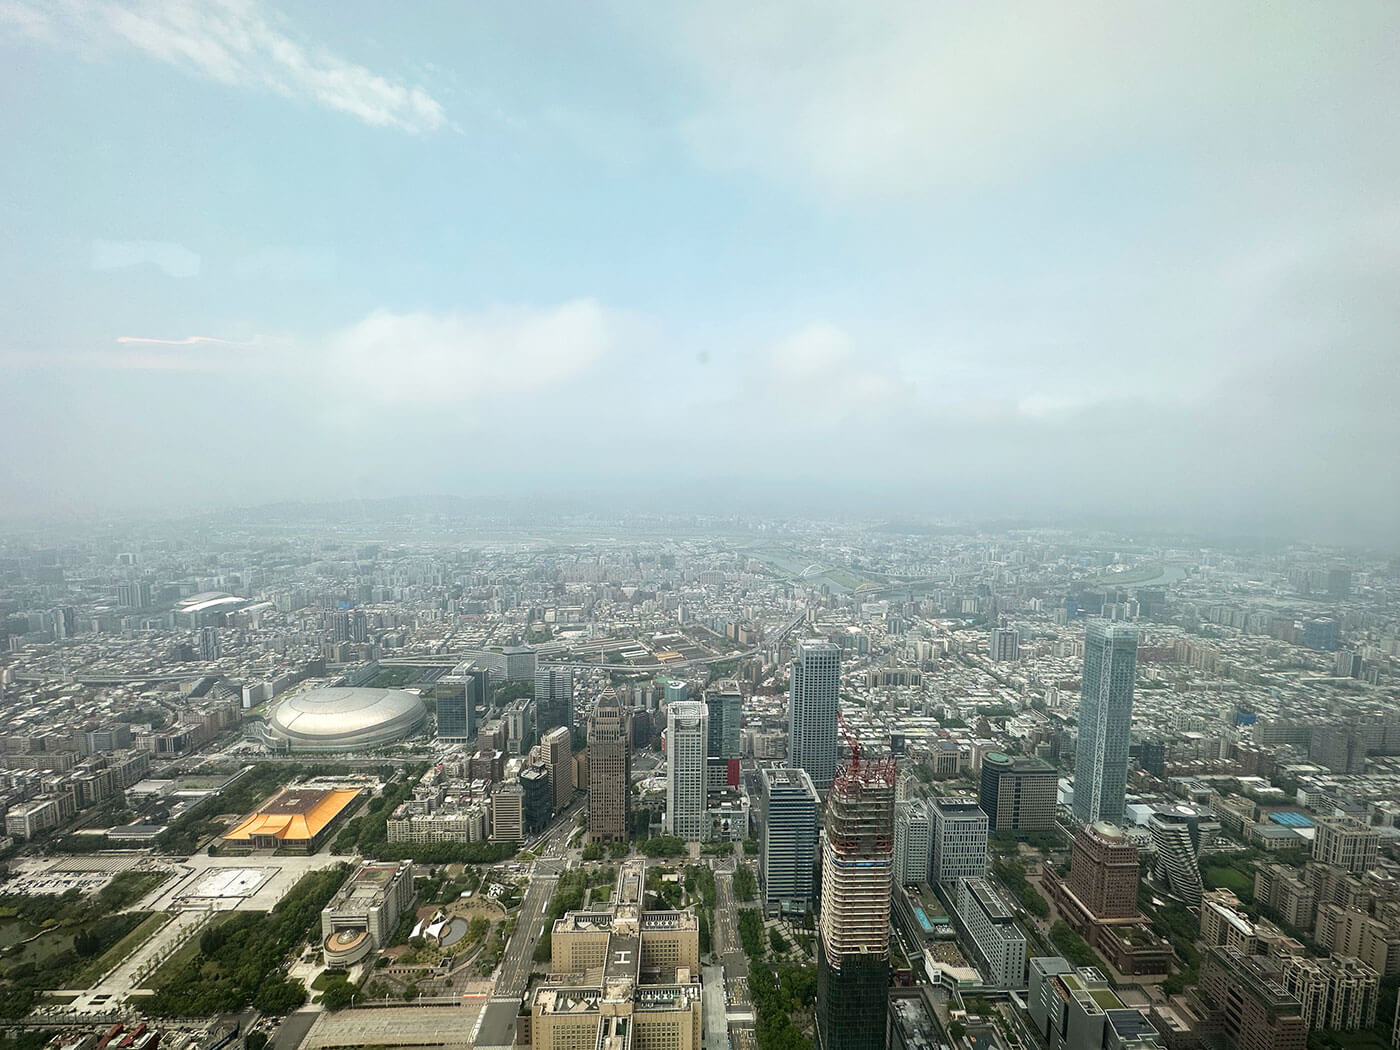 Taipei Guide - The view from the observatory at Taipei 101